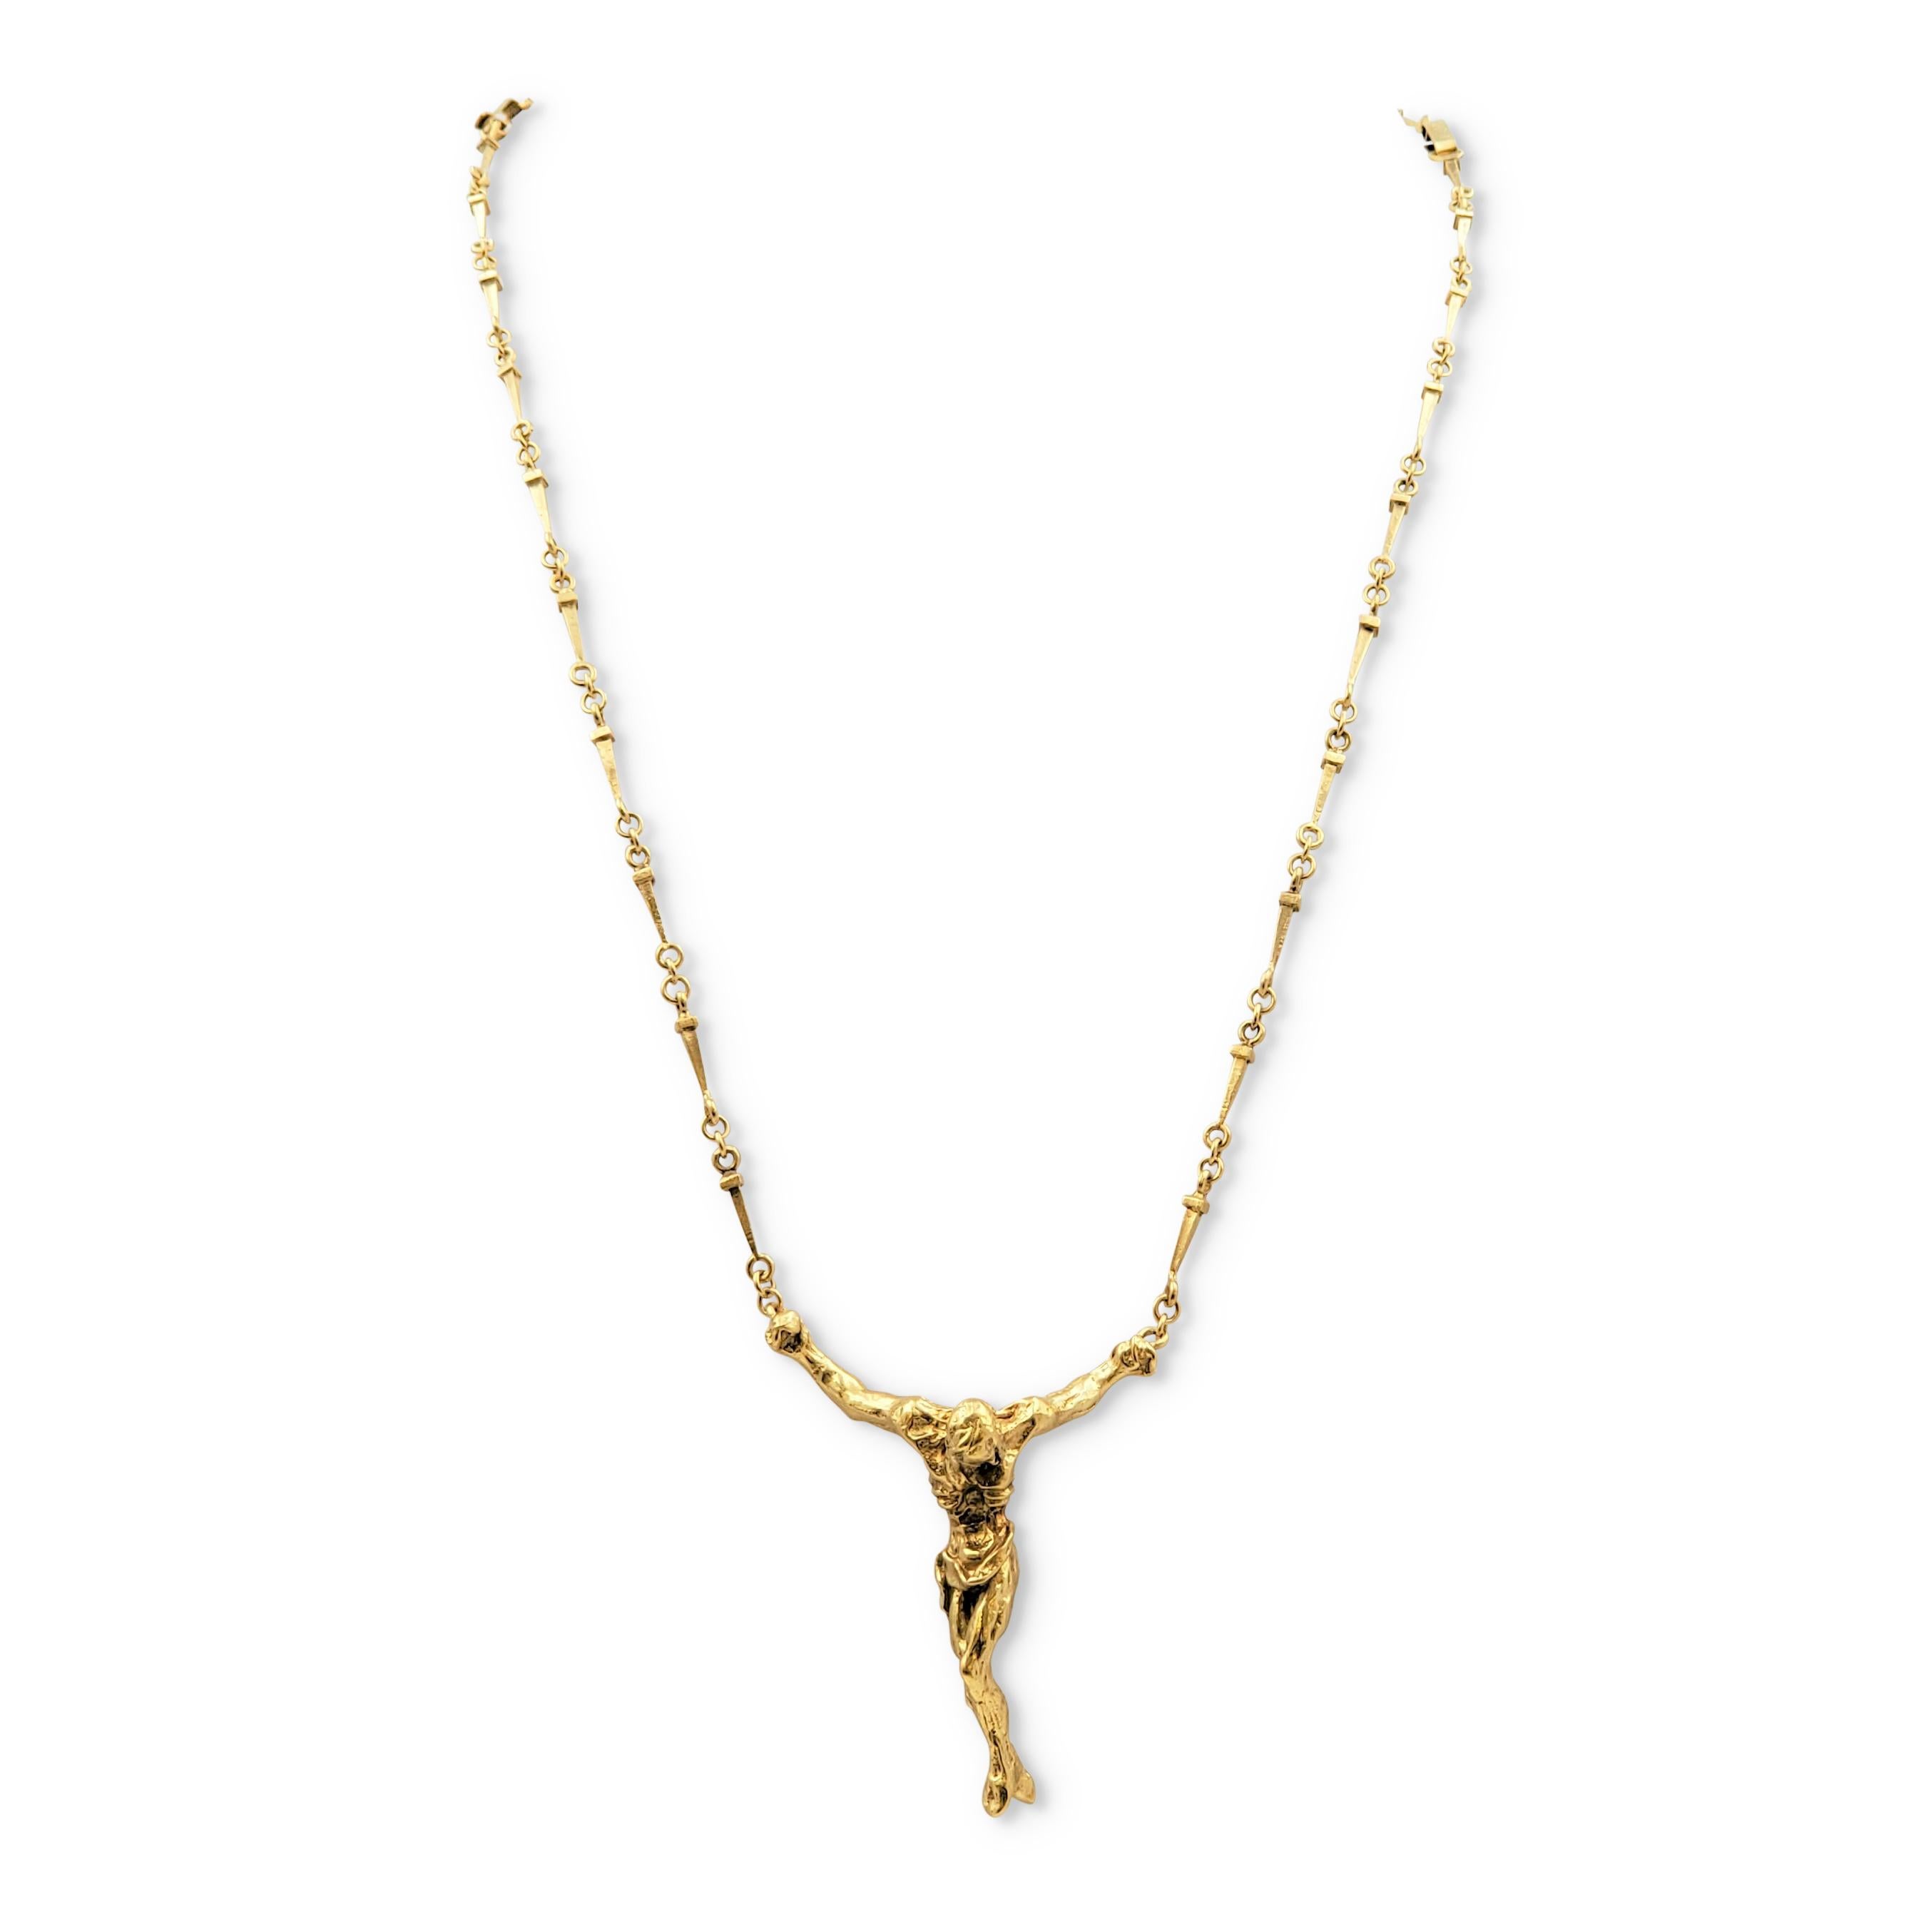 Limited Edition Salvador Dali Large Christ Saint John On The Cross convertible necklace and bracelet set crafted in 18 karat yellow gold. Numbered 896 out of 1,000 made. Signed Dali, A-896. Necklace measures 25 inches (or 17 inches if wearing the